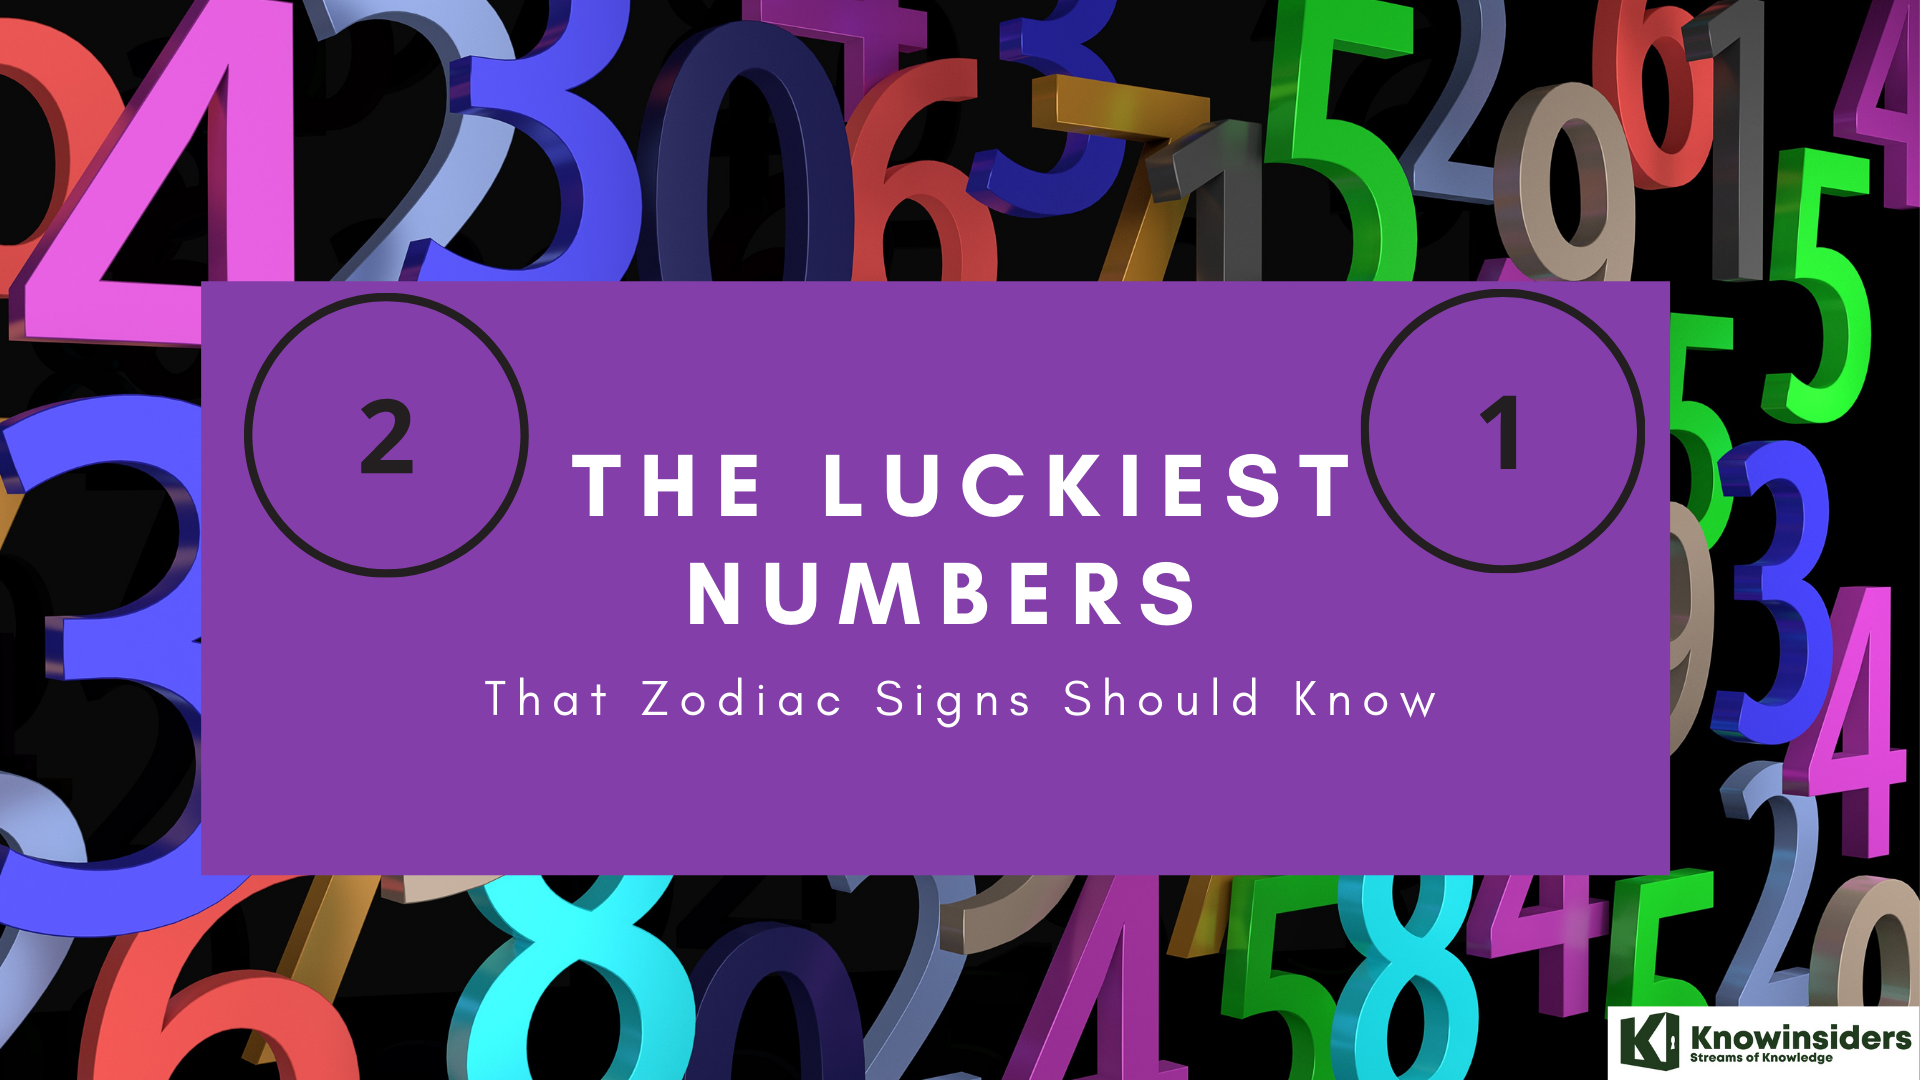 Top Luckiest Numbers for Zodiac Signs According to Astrology